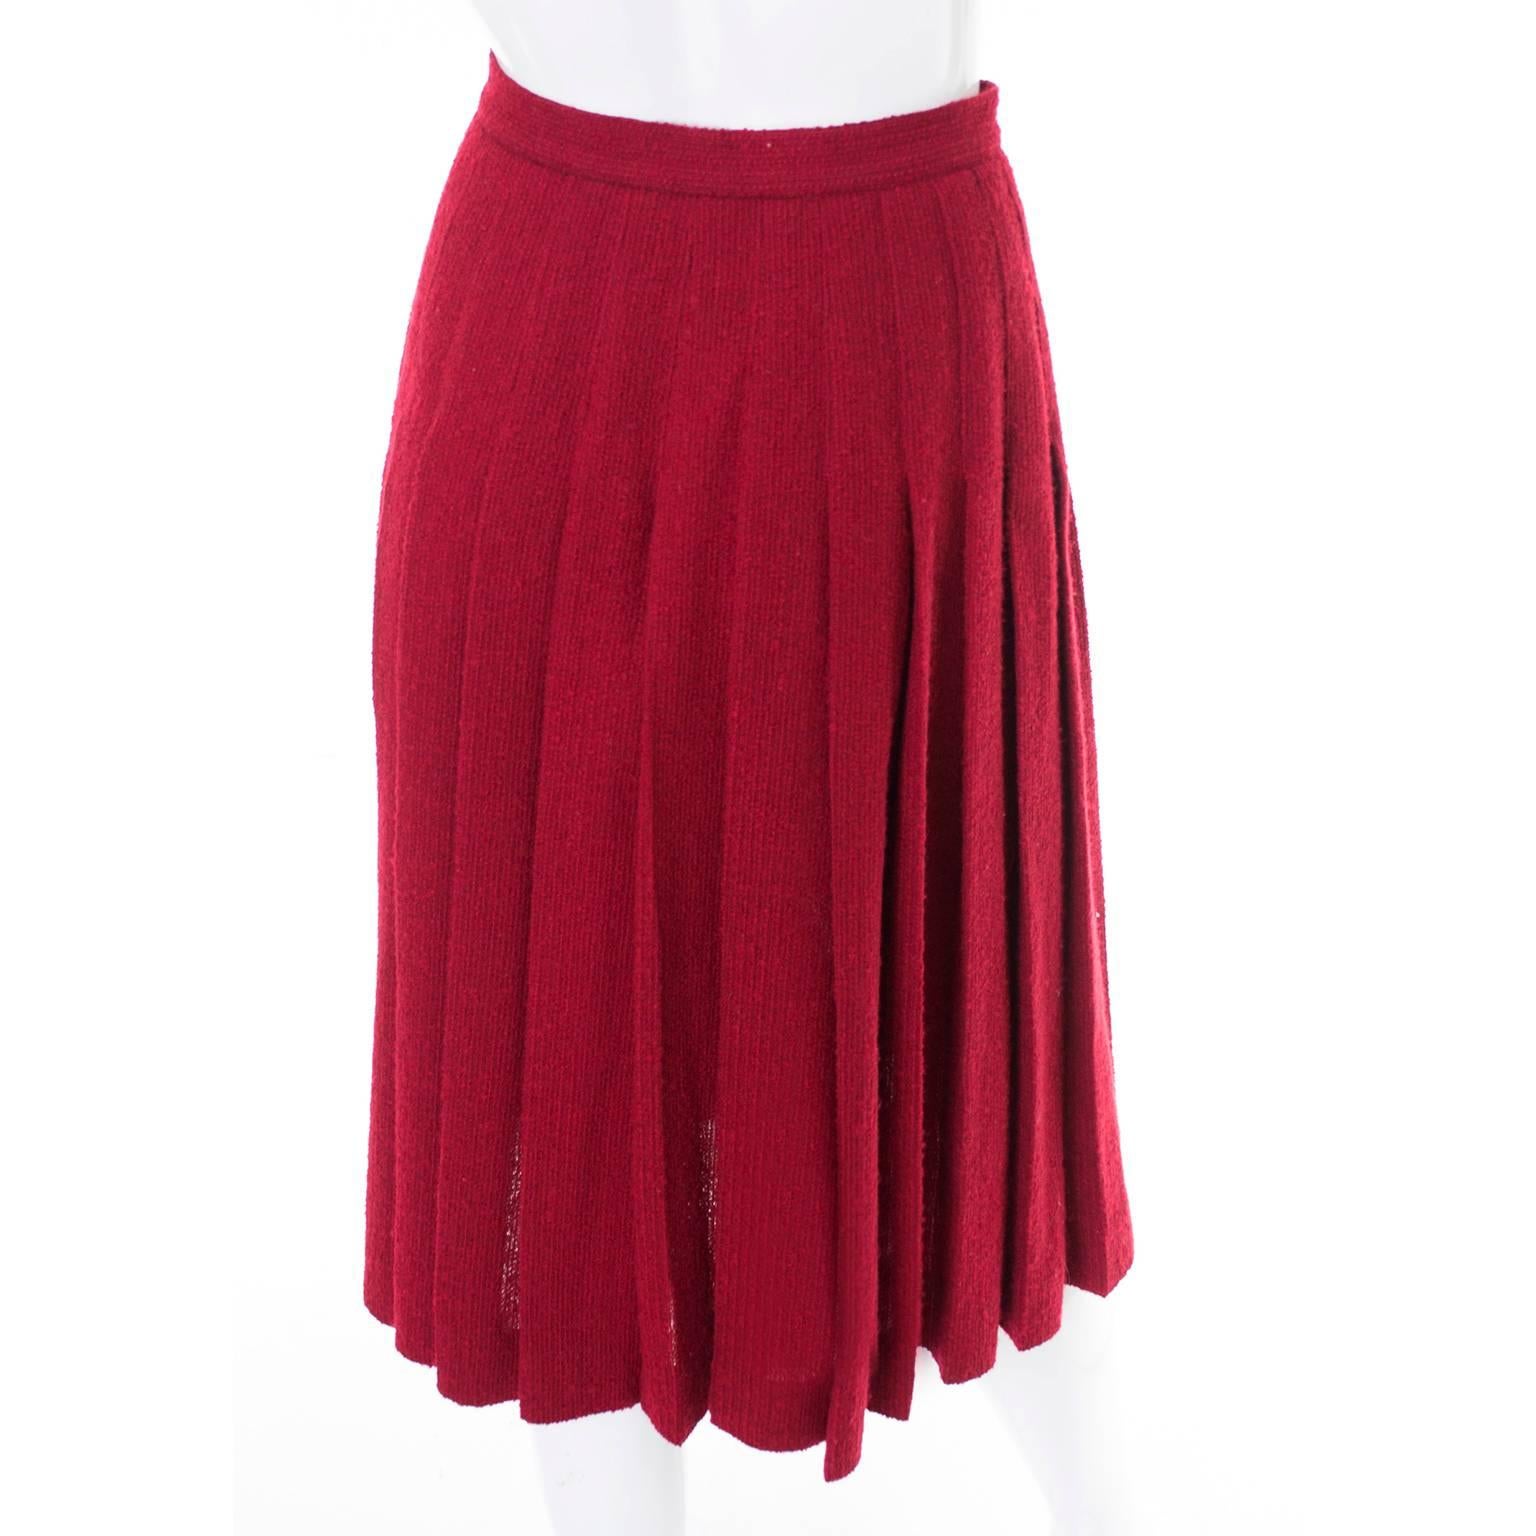 This is a fabulous vintage skirt designed by Yves Saint Laurent in the 1990s. The burgundy wool boucle skirt is beautifully pleated and has nice gold buttons on the front at the side. The back of the skirt is fully pleated and the front shows